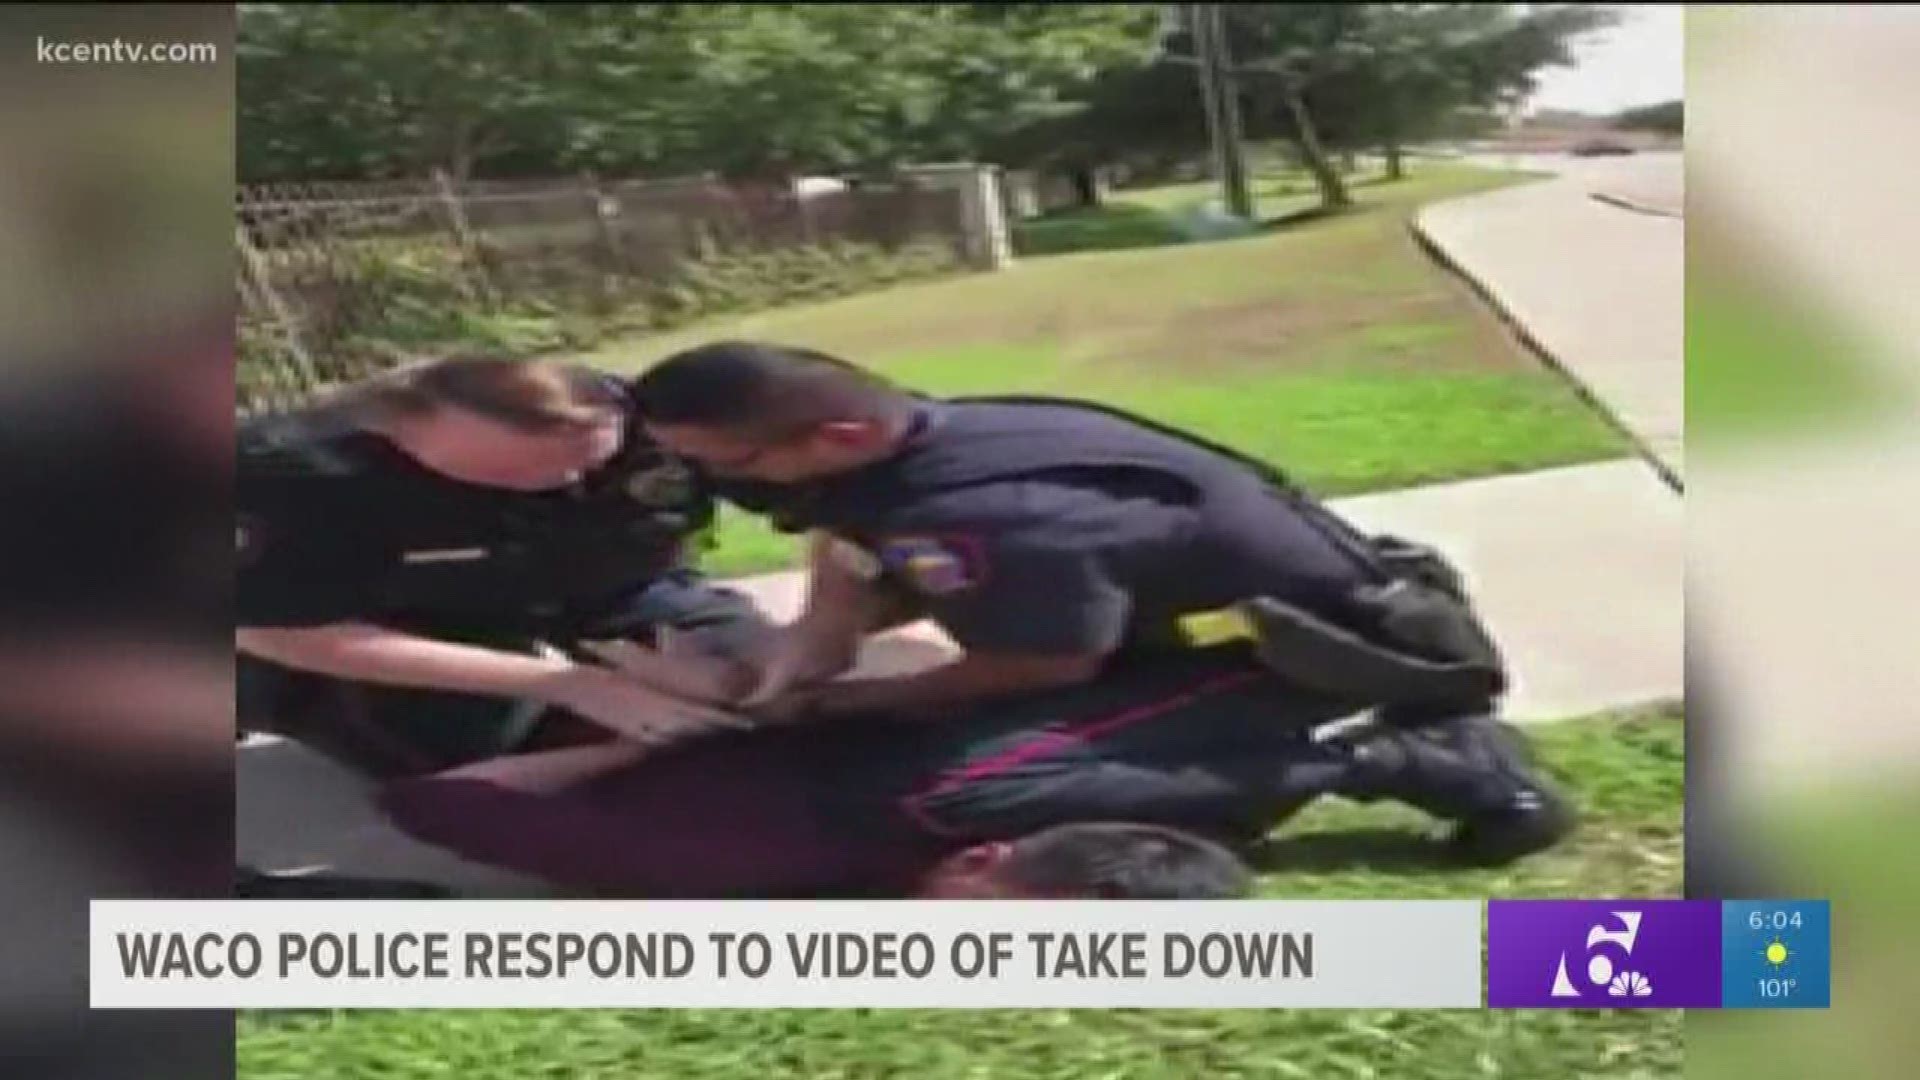 Waco PD is responding to a viral video showing officers taking a man to the ground.